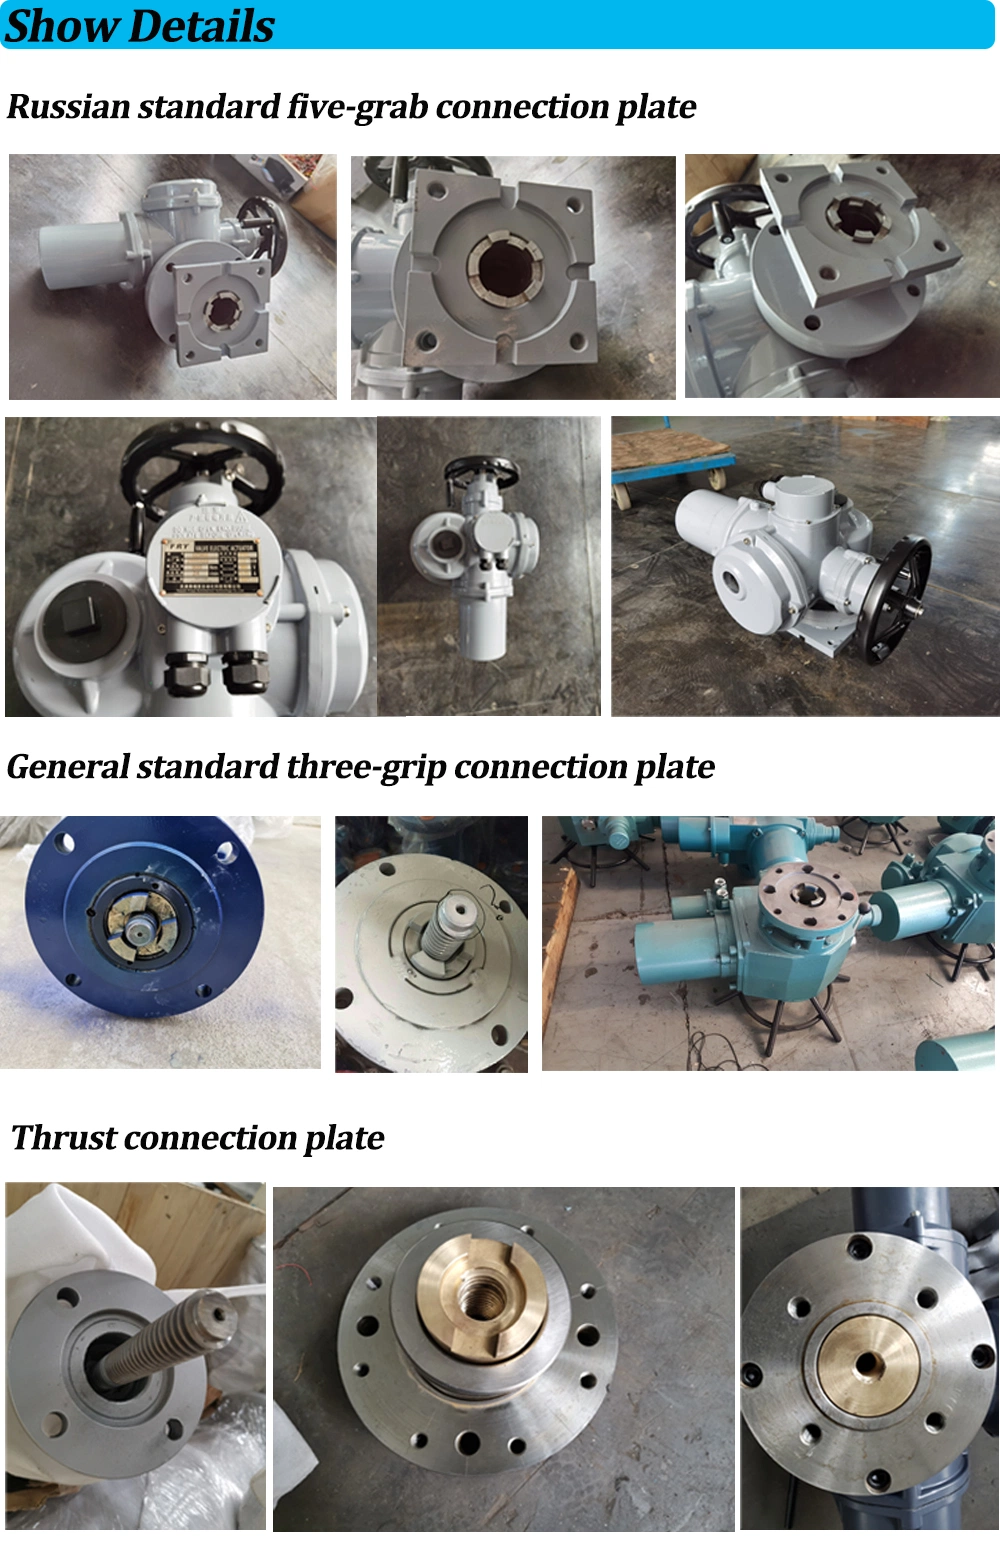 Multi-Turn Electric Actuator with Two-Way Clutch for The Gate Valves Russian (GOST) Standards Dzw90